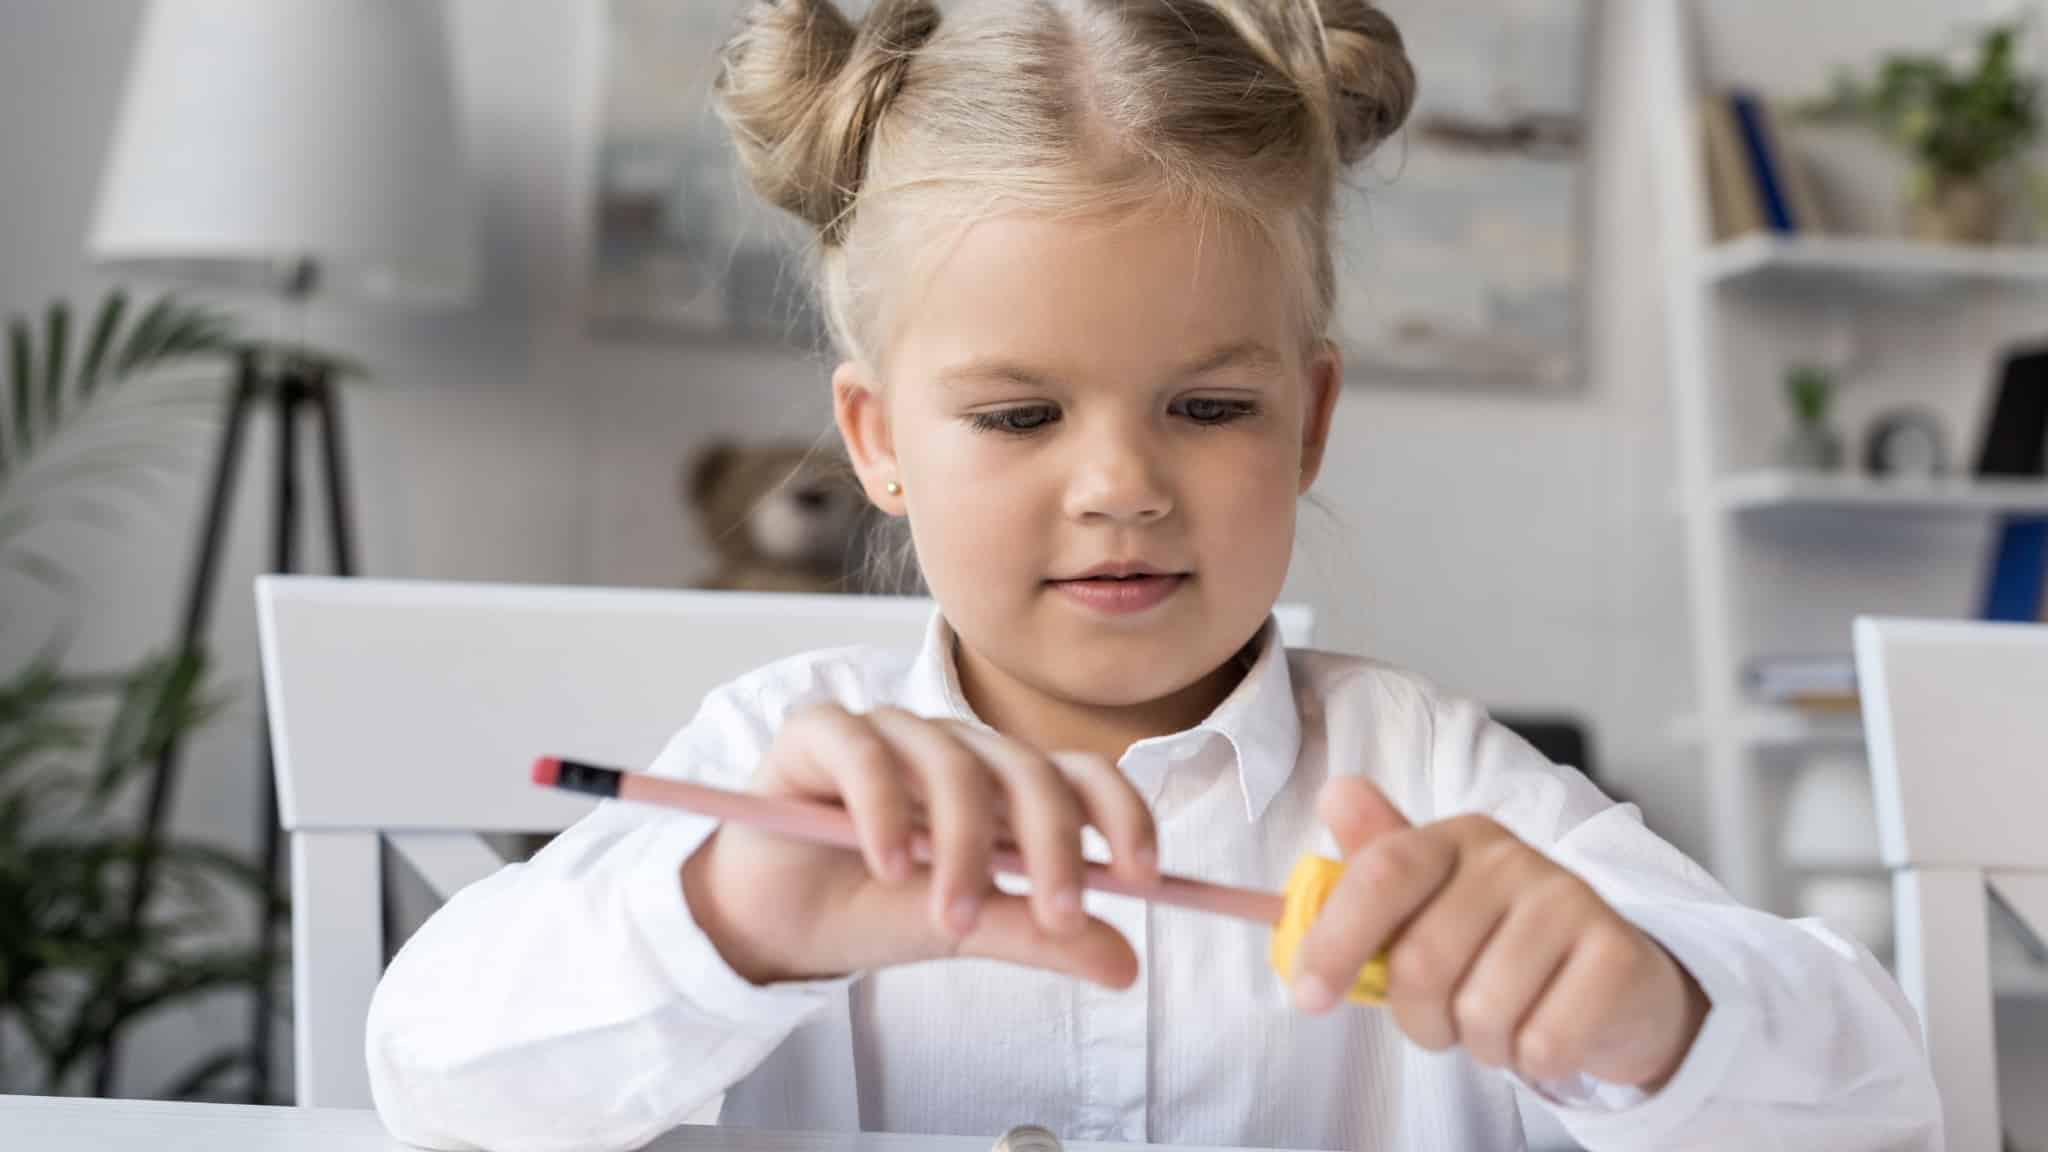 From when can a child properly hold a pencil?